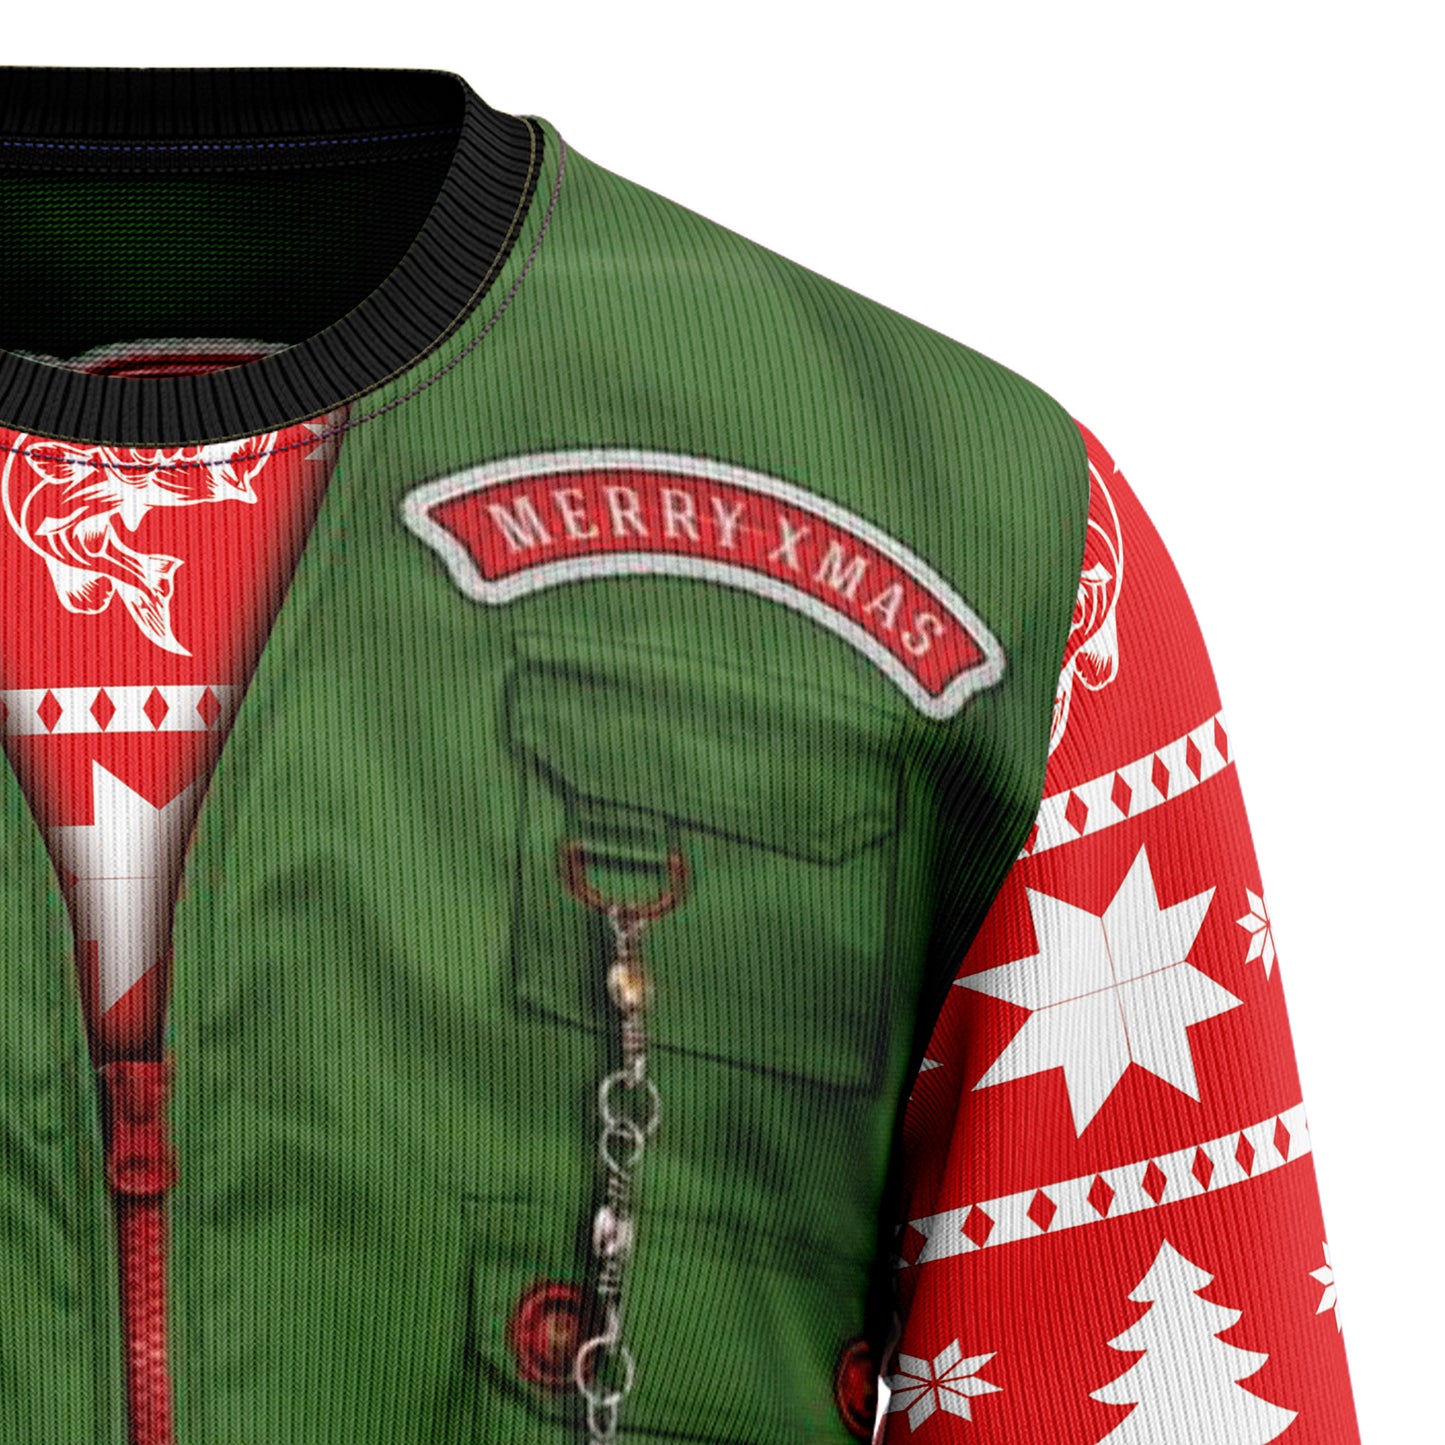 Merry Fishmas HT92507 Ugly Christmas Sweater